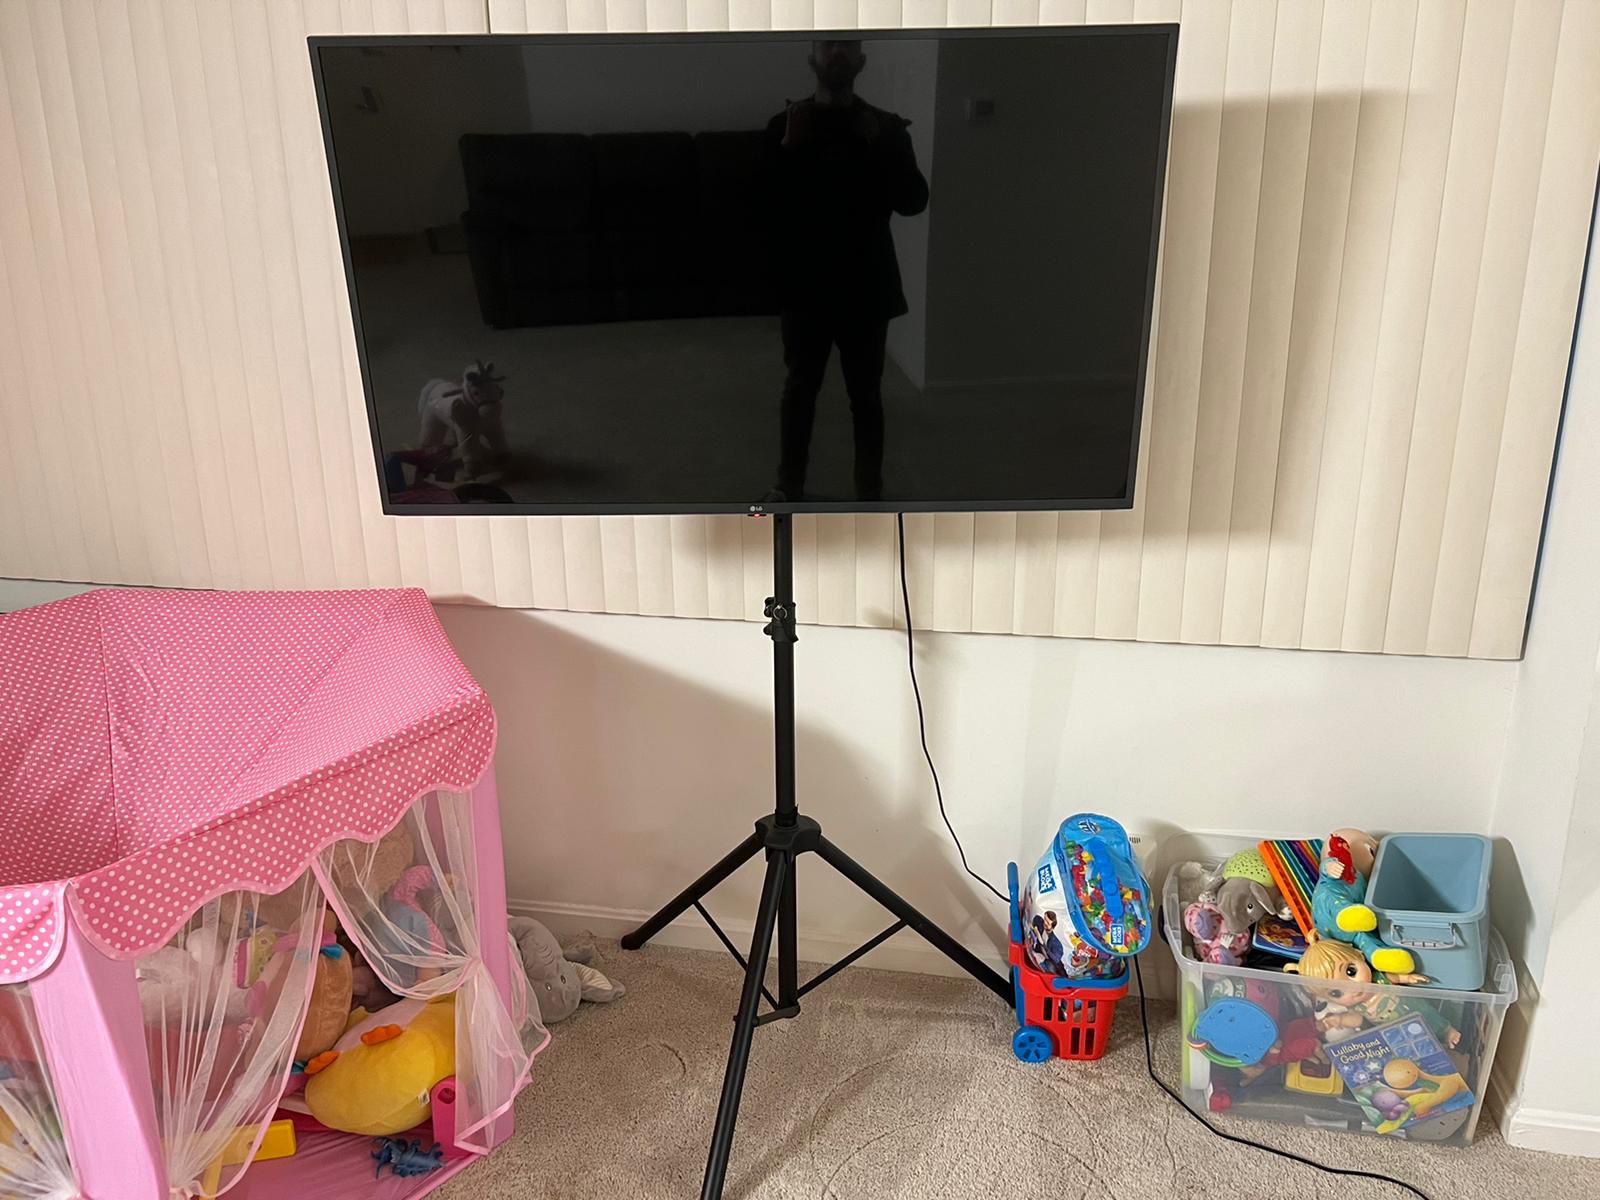 Tv With Stand 